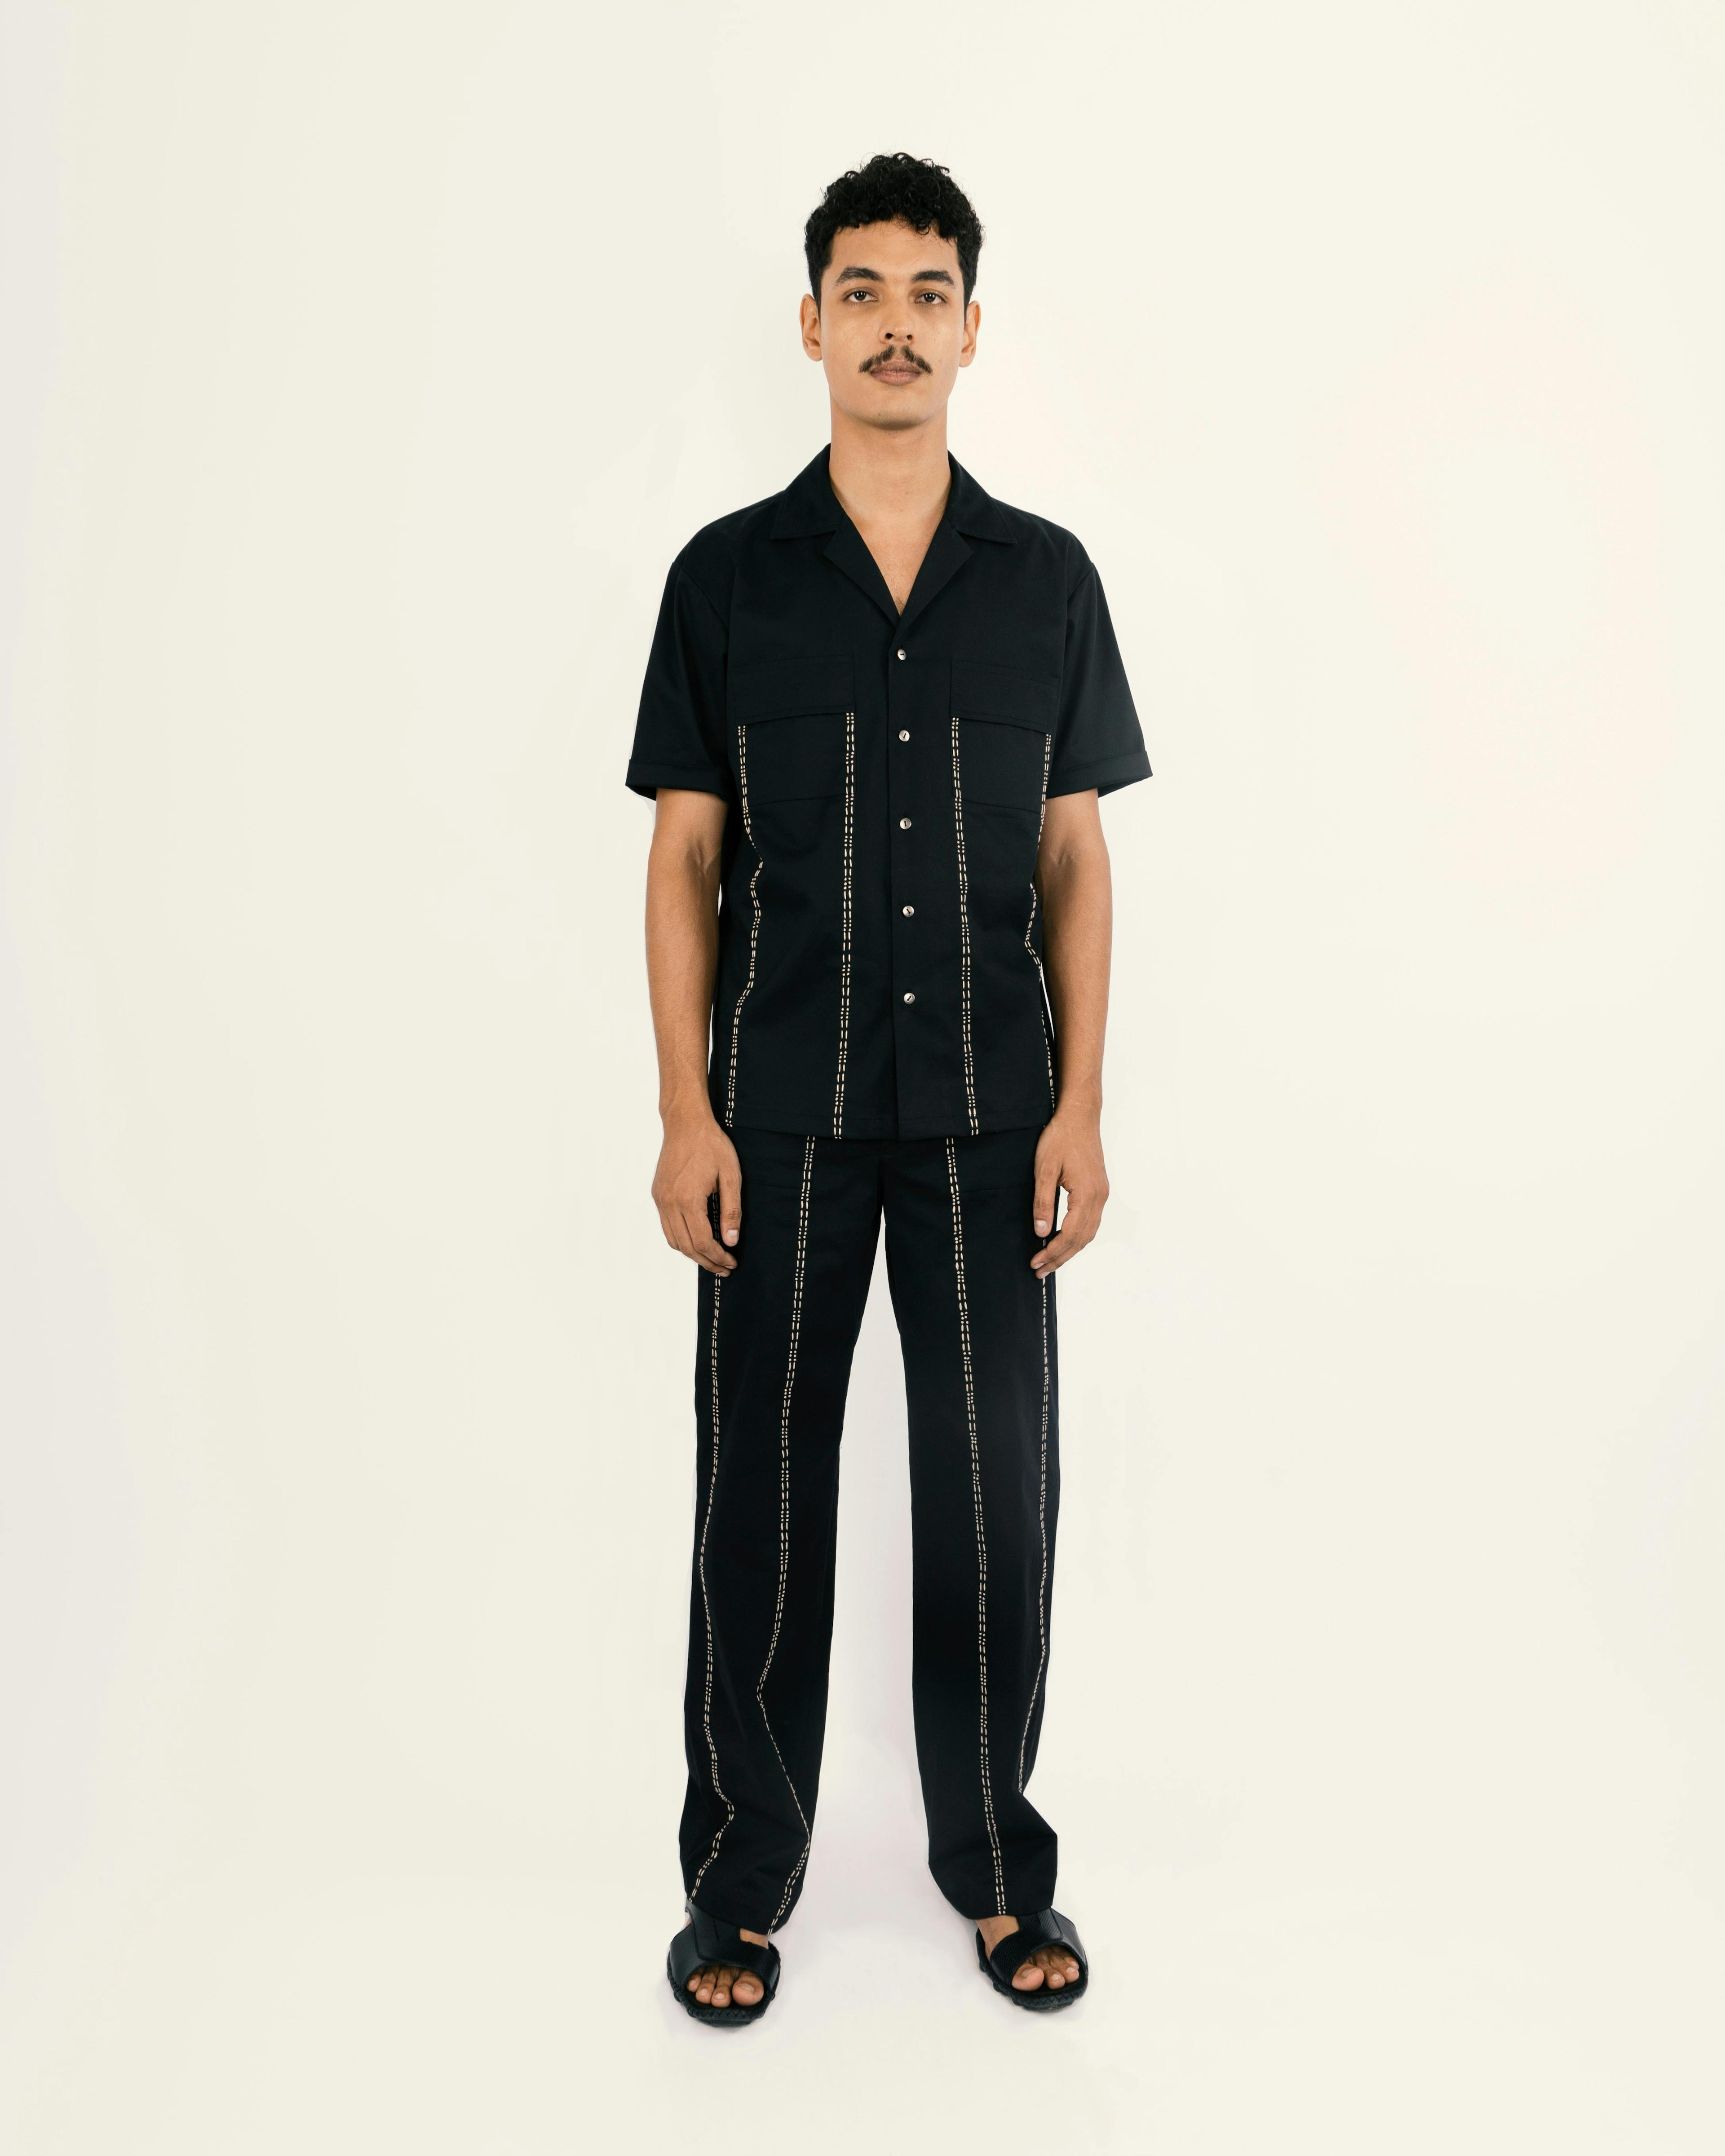 PATCH POCKET PANT, a product by Oshin